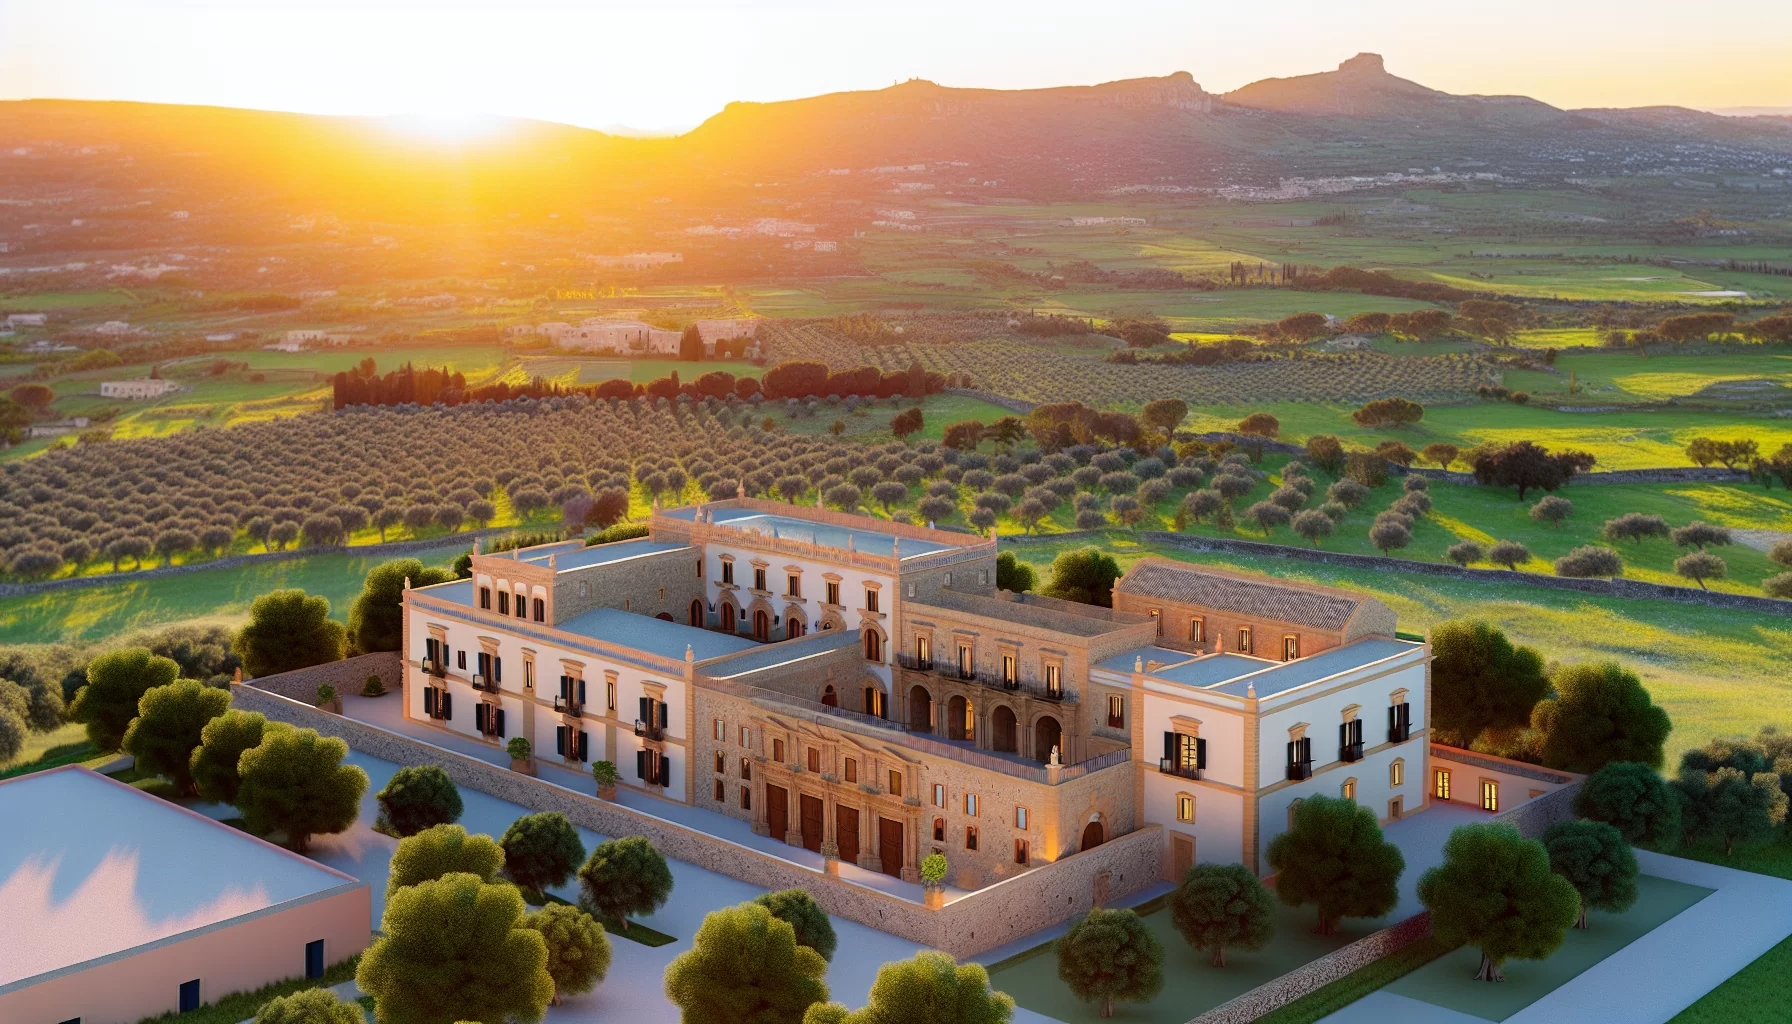 Introducing palazzo Artemide: a luxurious blend of history and modernity in Sicily's scenic landscape